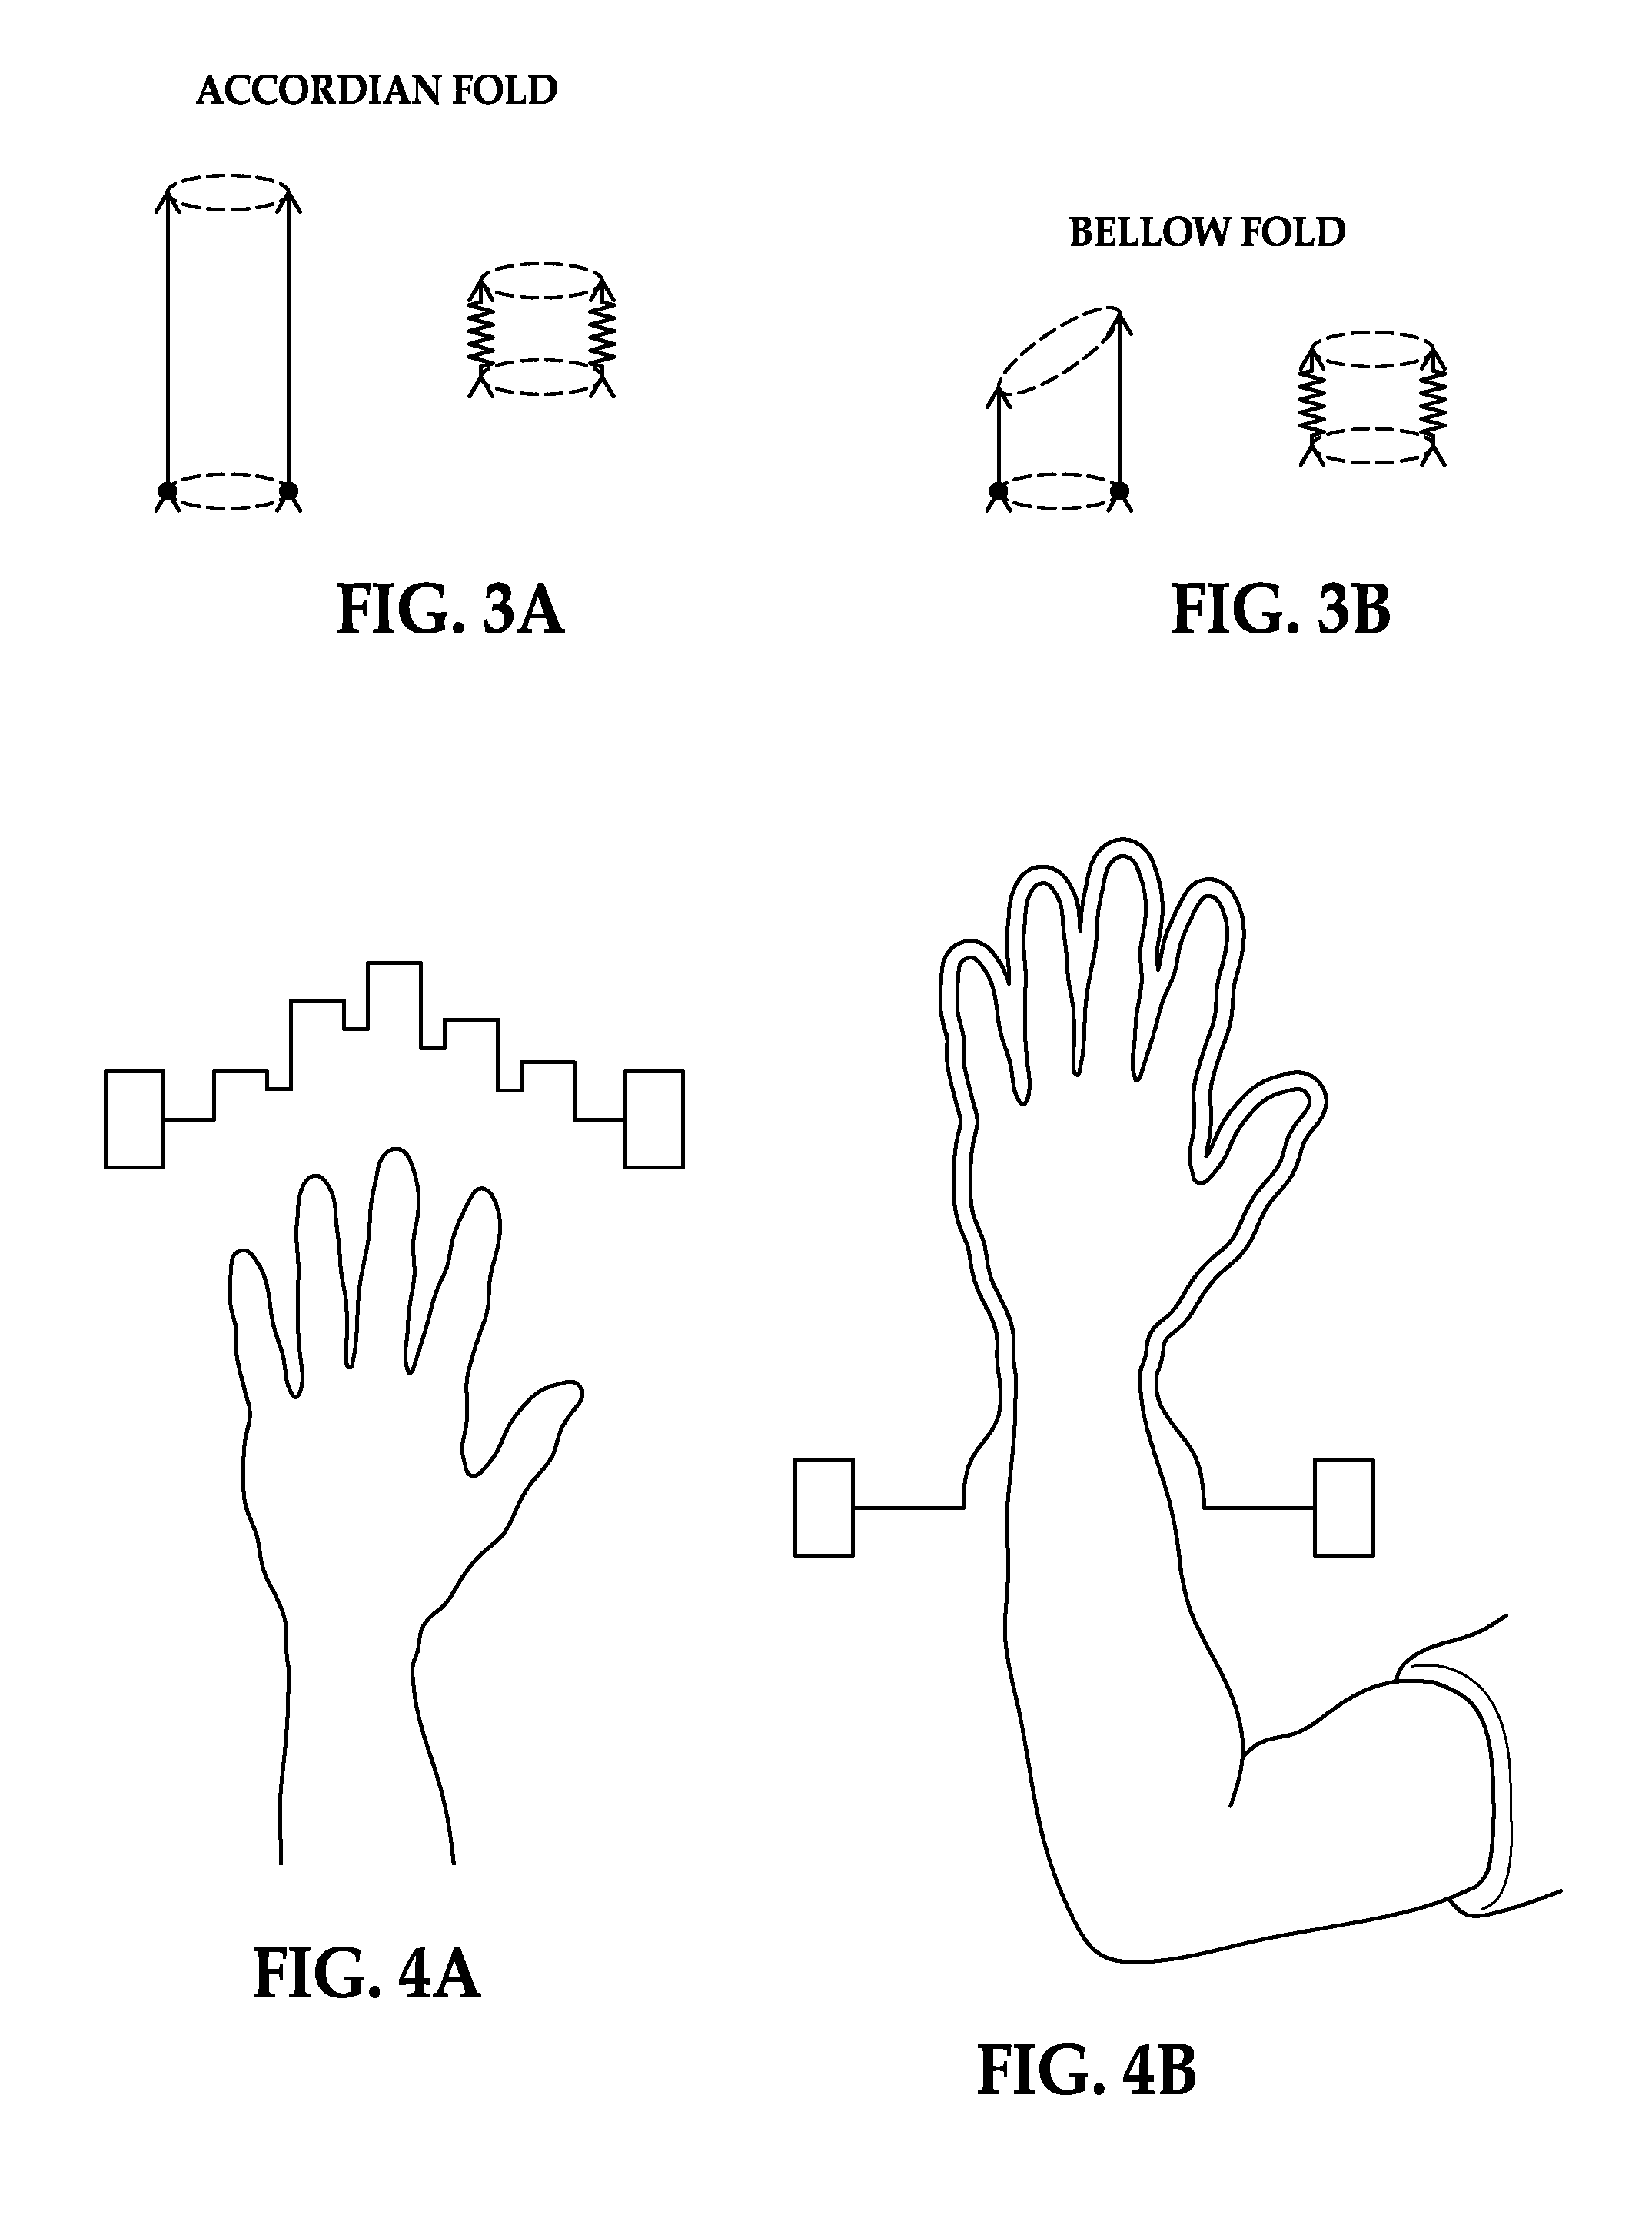 Surgical glove appliance device